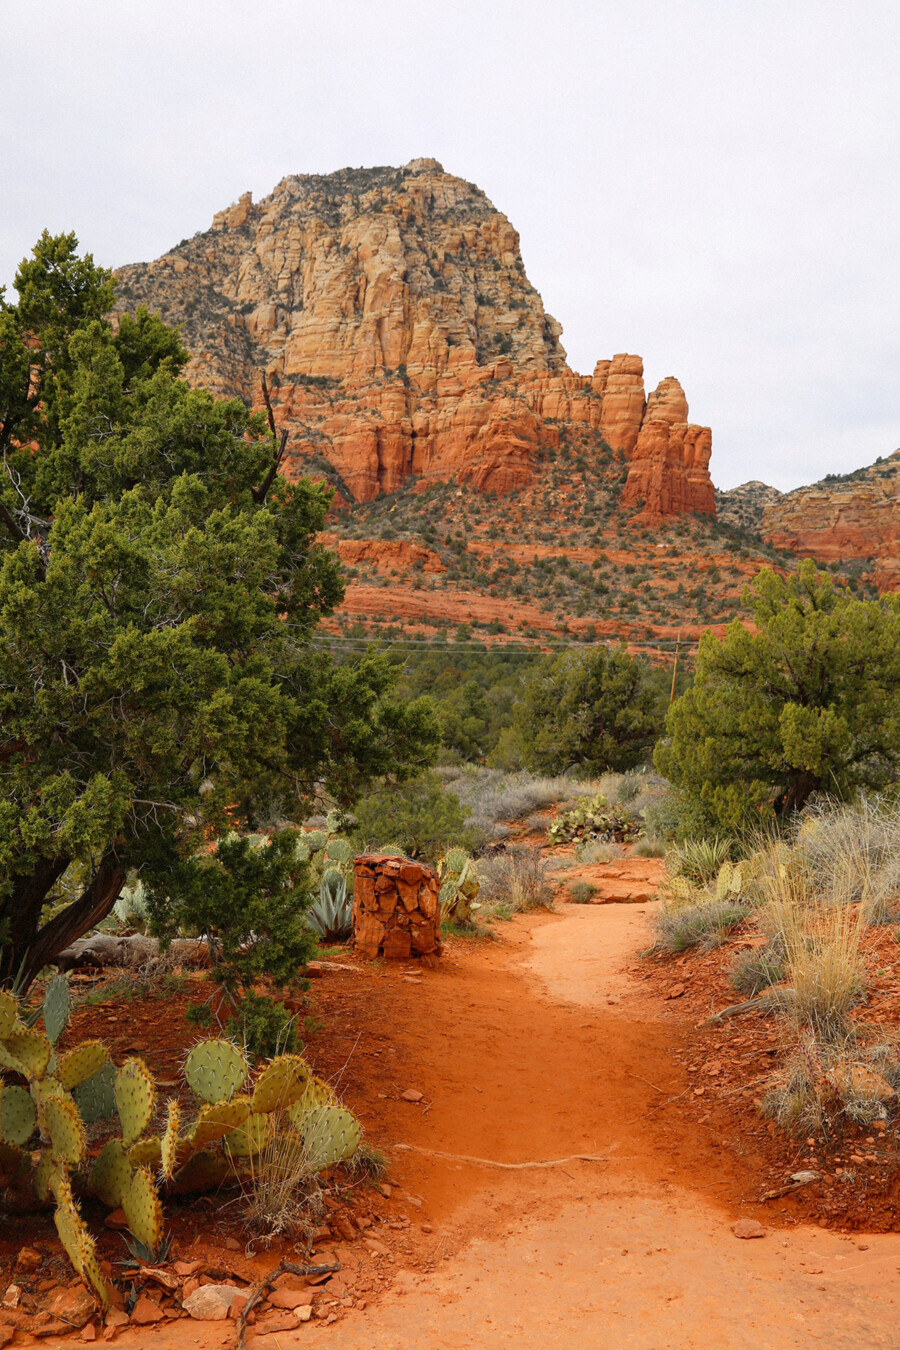 The Sedona Teacup Trail through desert flora with rock formations in the distance in Sedona, Arizona.